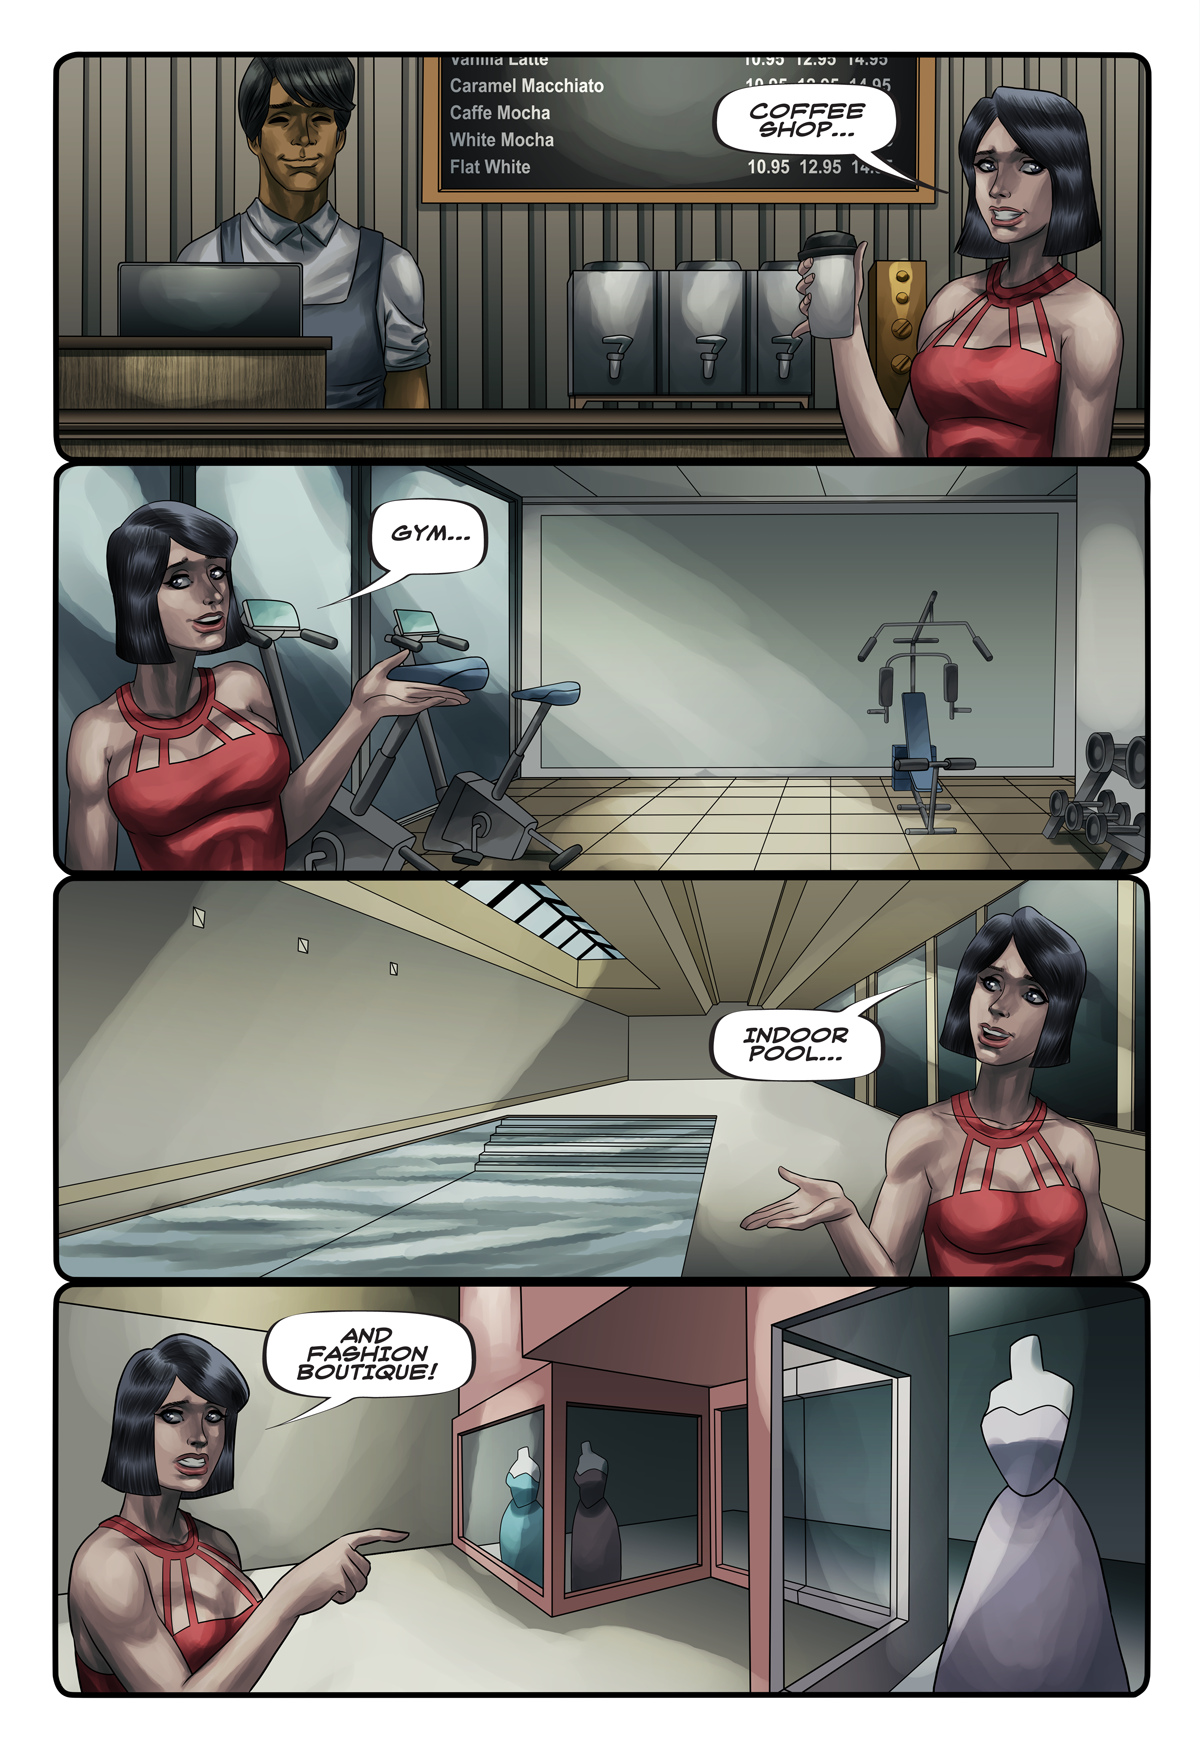 Girls Night Out - Prologue Page 6: Introducing Even More Feature Attractions